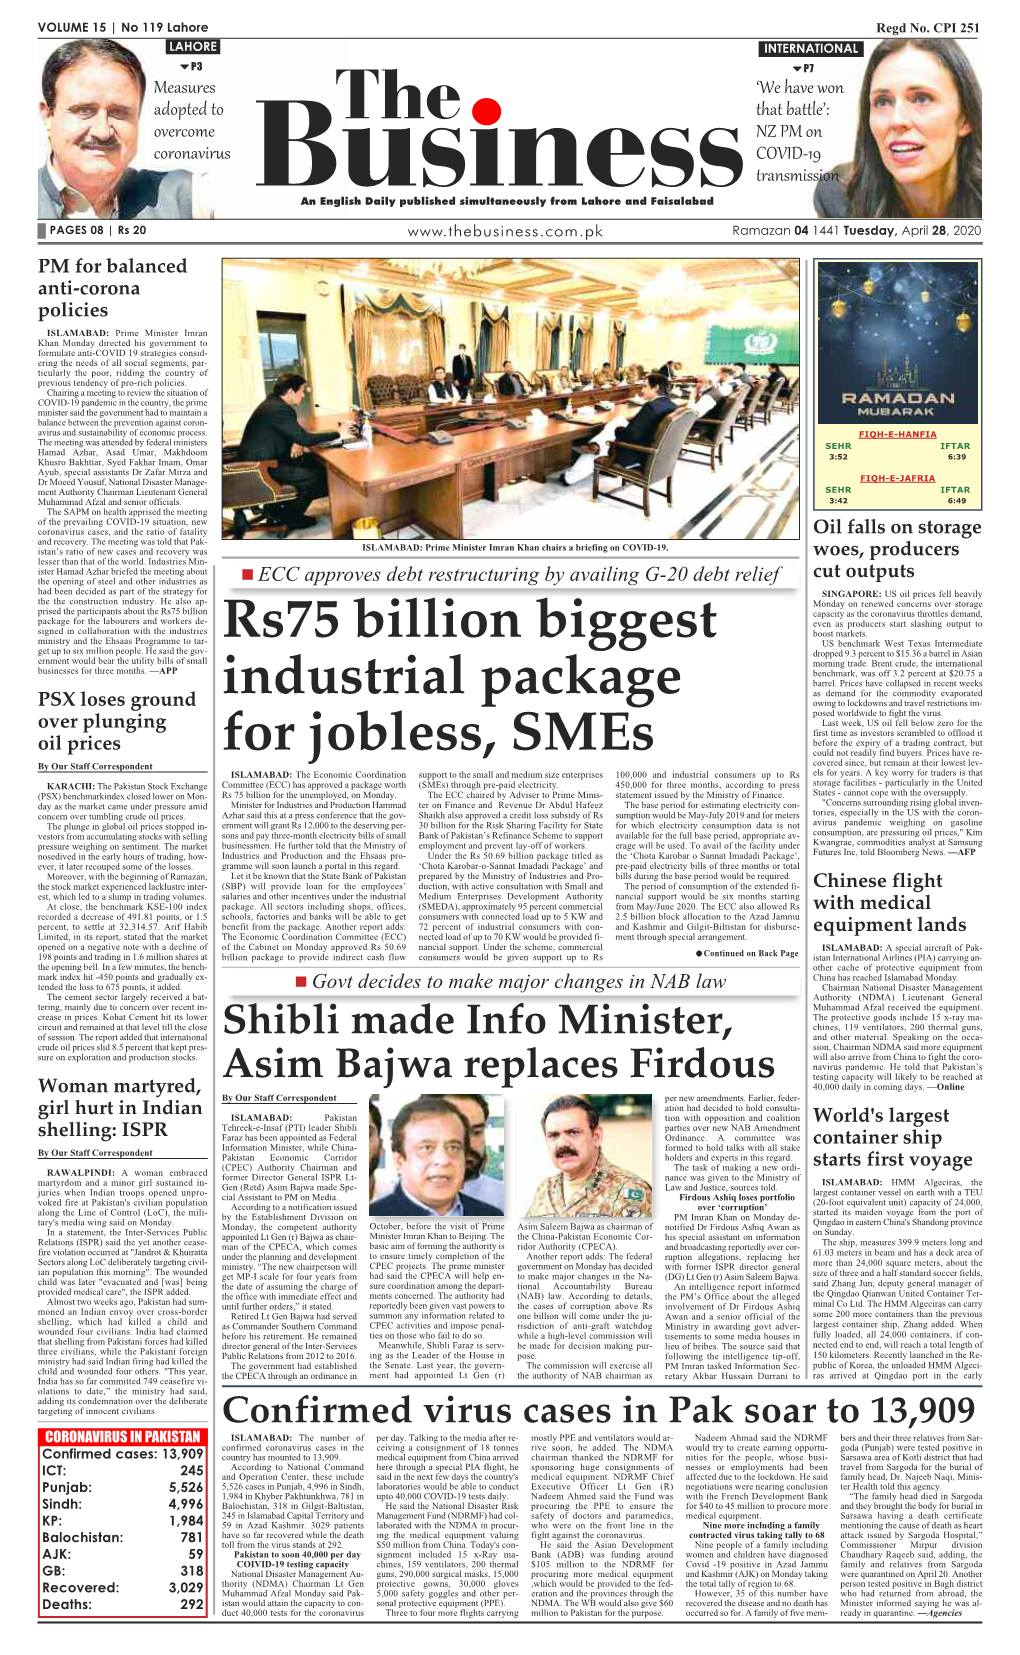 Confirmed Virus Cases in Pak Soar to 13909 Rs75 Billion Biggest Industrial Package for Jobless, Smes Shibli Made Info Minister, Asim Bajwa Replaces Firdous